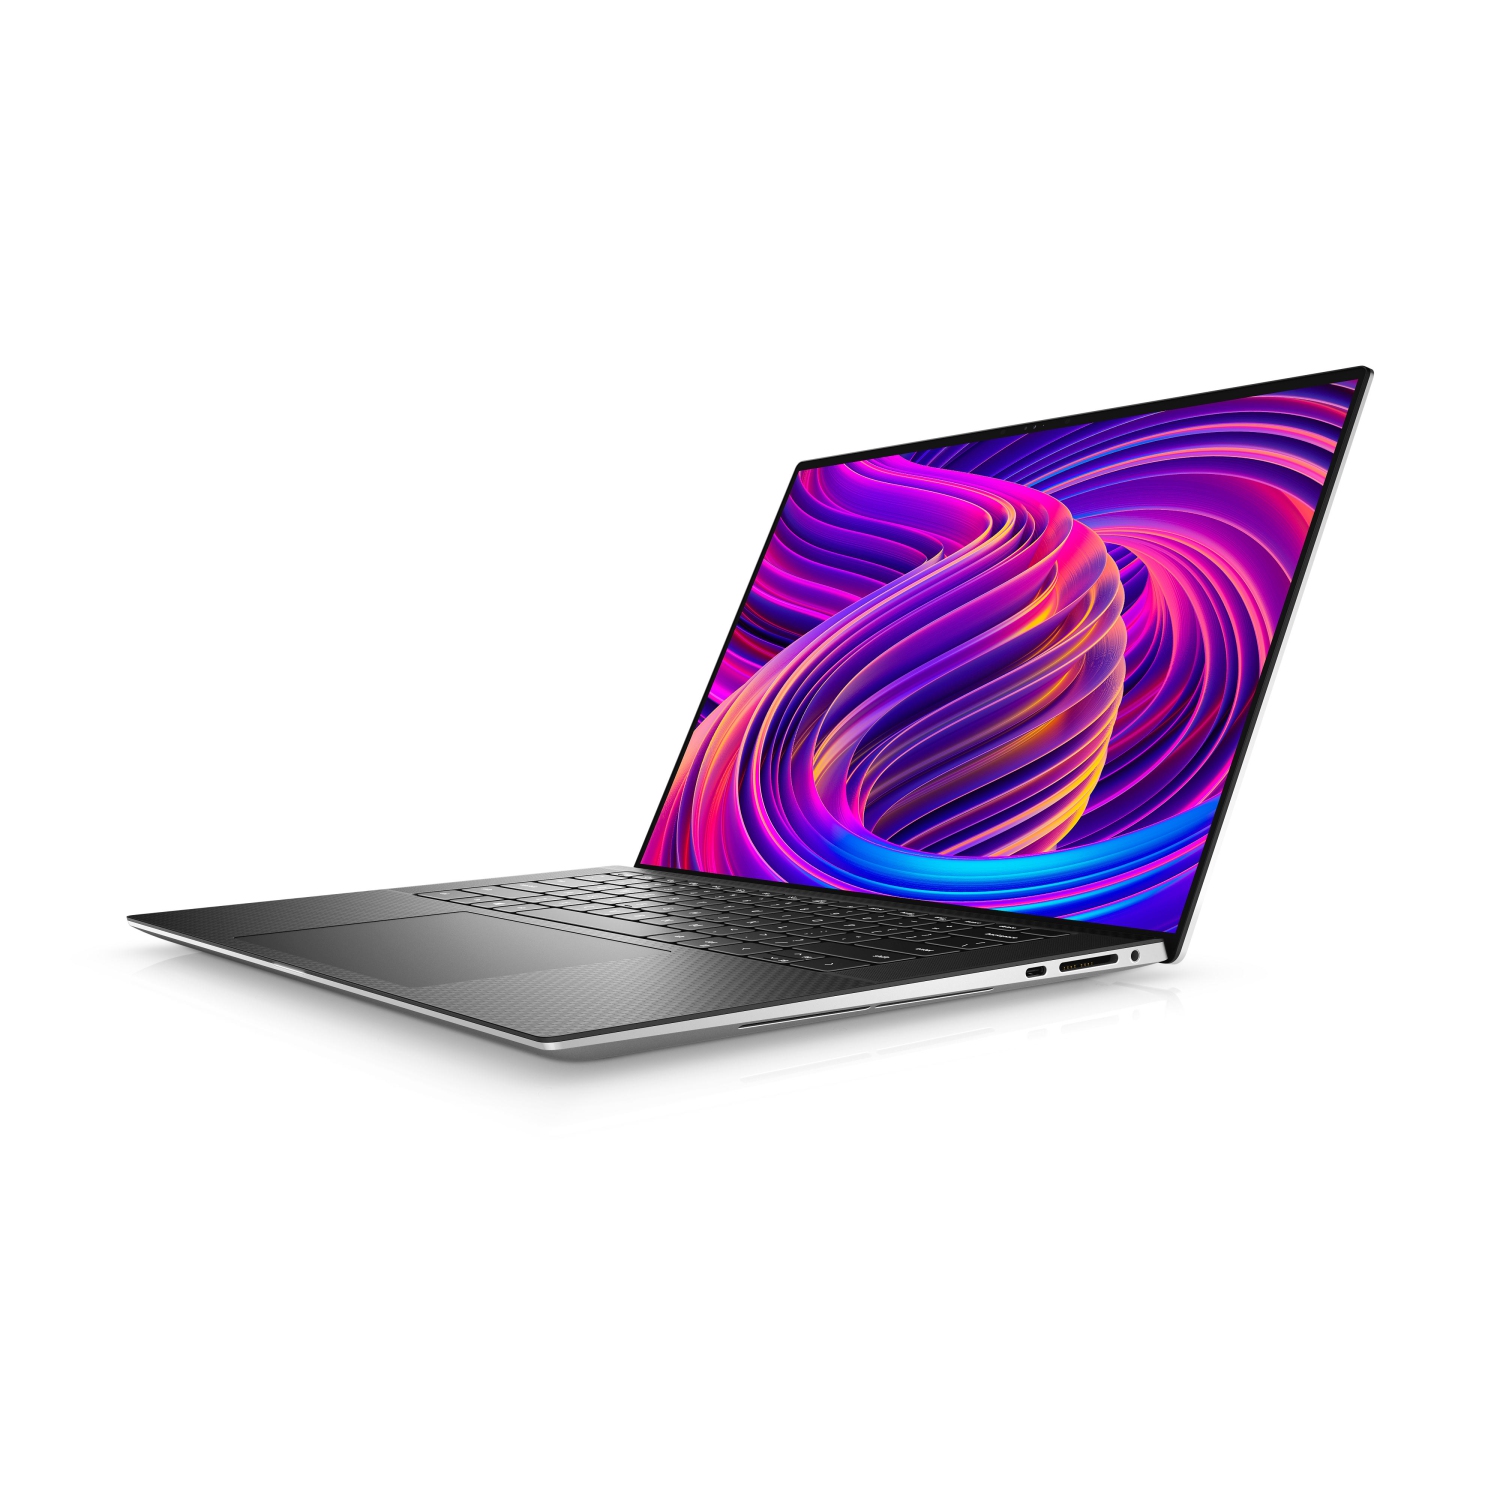 Refurbished (Excellent) - Dell XPS 15 9510 Laptop (2021) | 15.6" FHD+ | Core i5 - 256GB SSD - 16GB RAM | 6 Cores @ 4.5 GHz - 11th Gen CPU Certified Refurbished